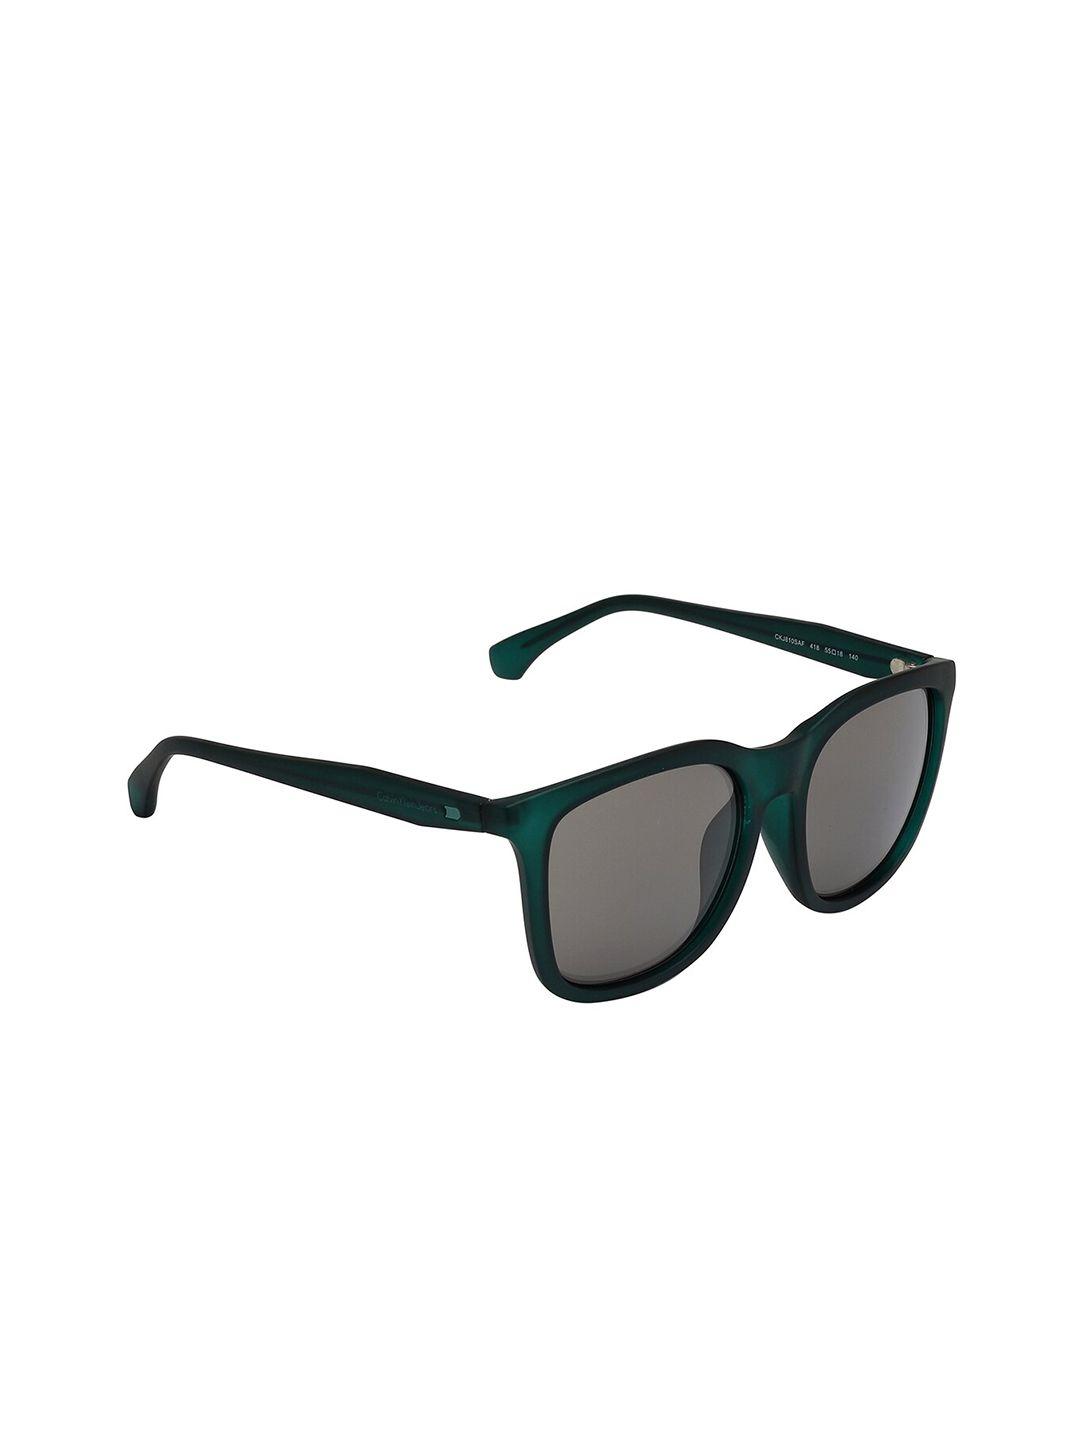 calvin klein women grey lens & green square sunglasses with uv protected lens